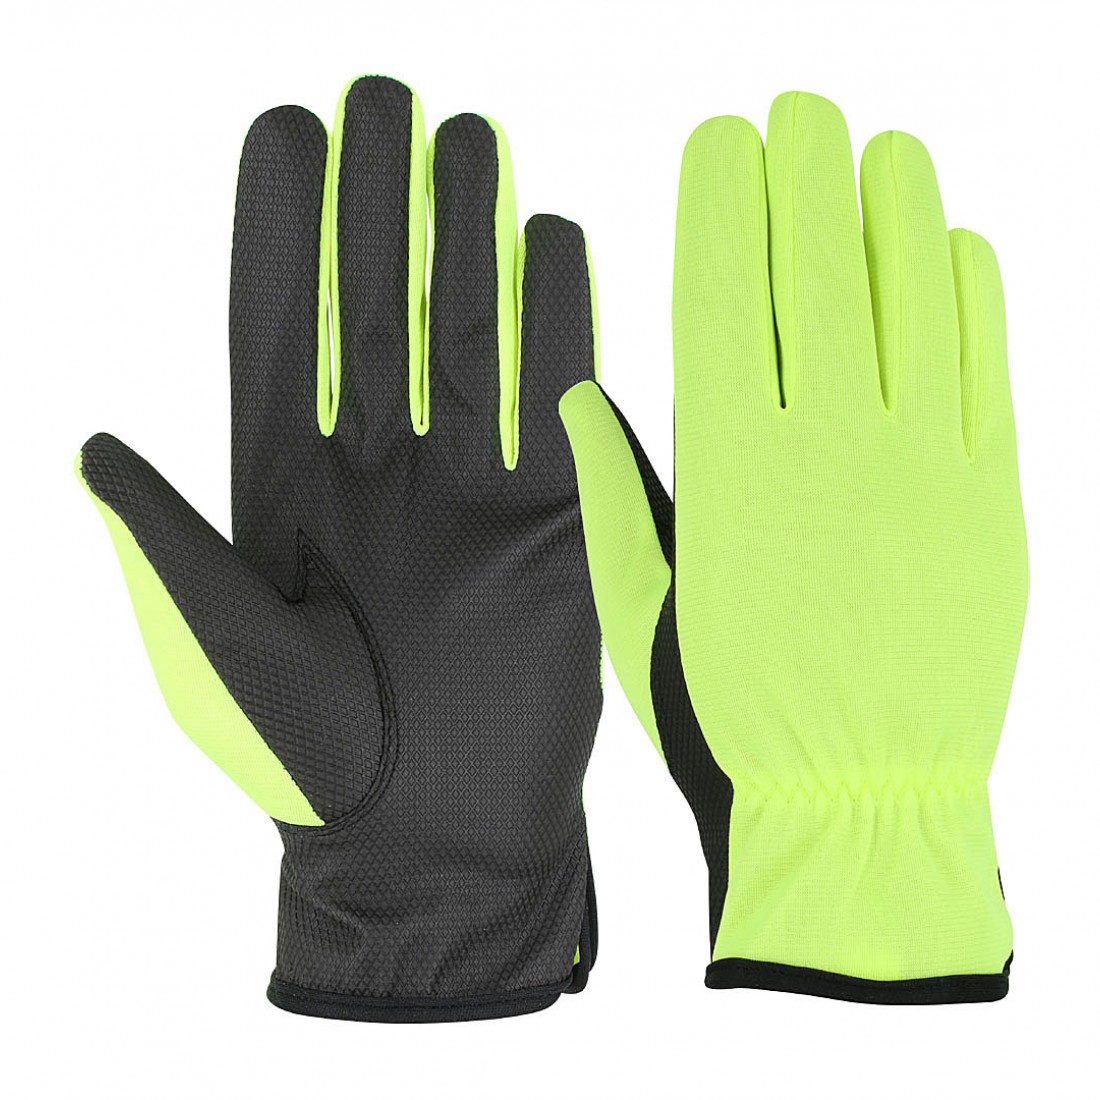 PU leather Gloves High Quality